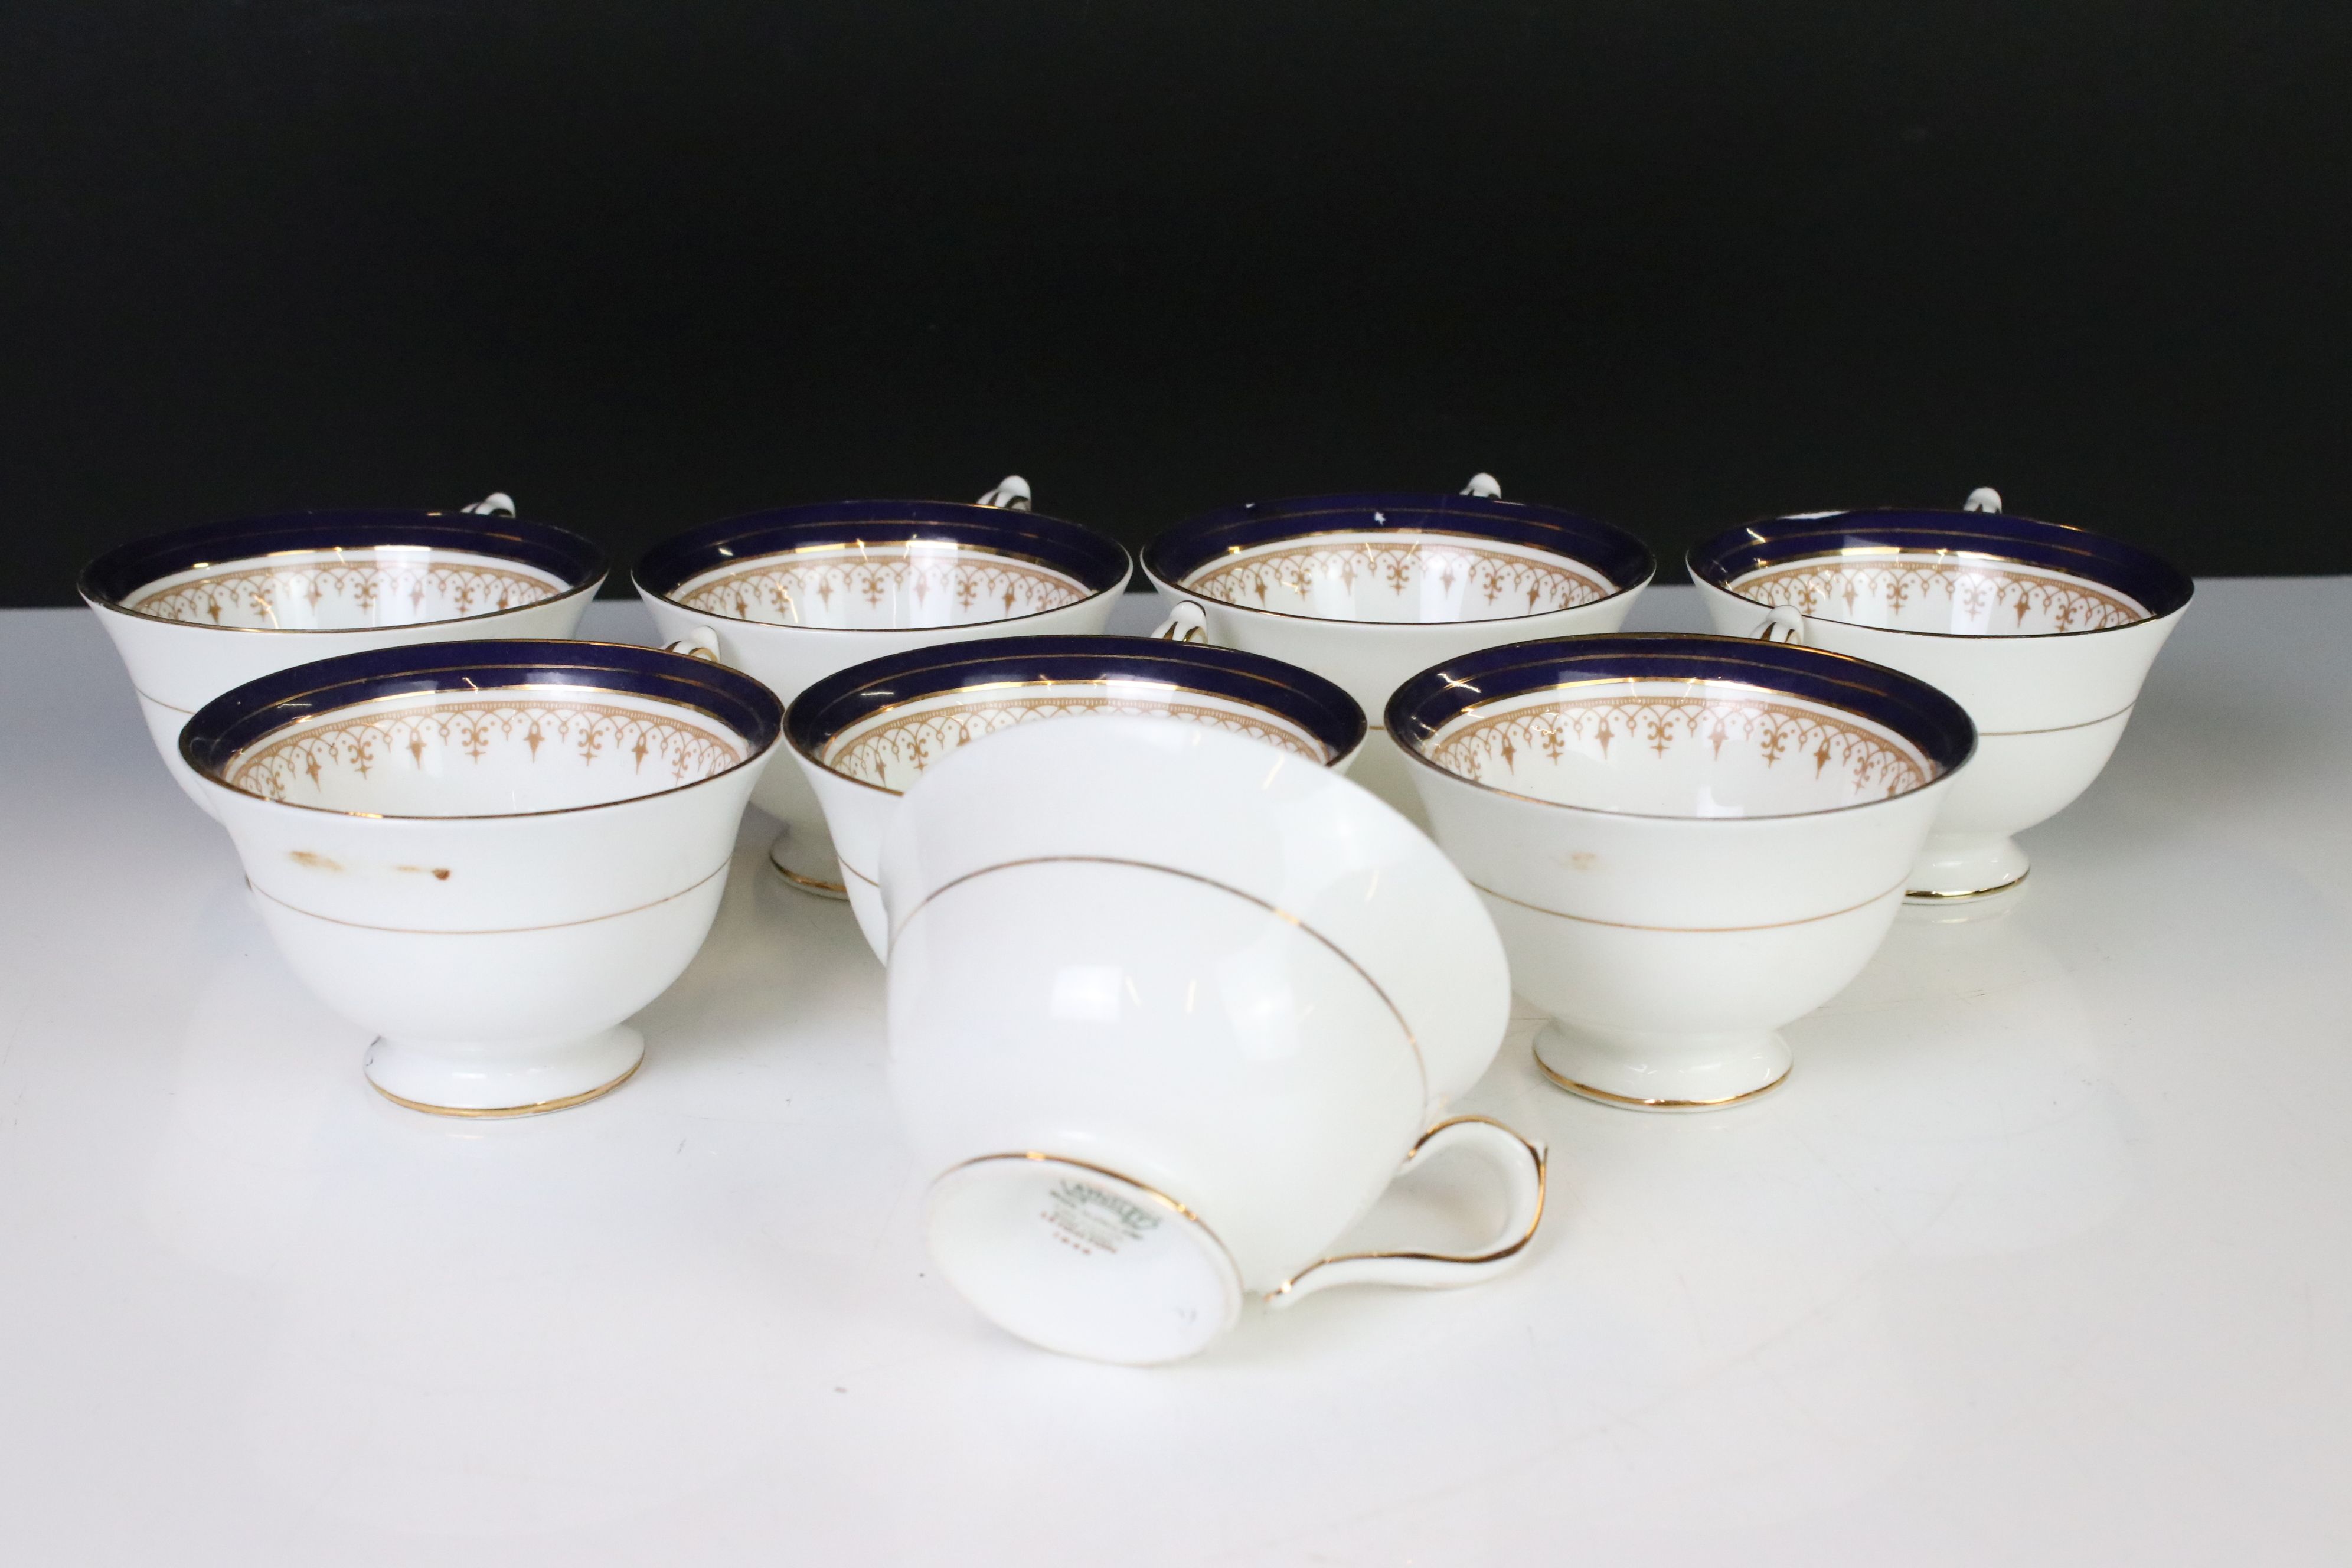 Collection of Aynsley dinner and tea ware in the Leighton pattern including Teapot, 2 soup bowls, - Image 14 of 16